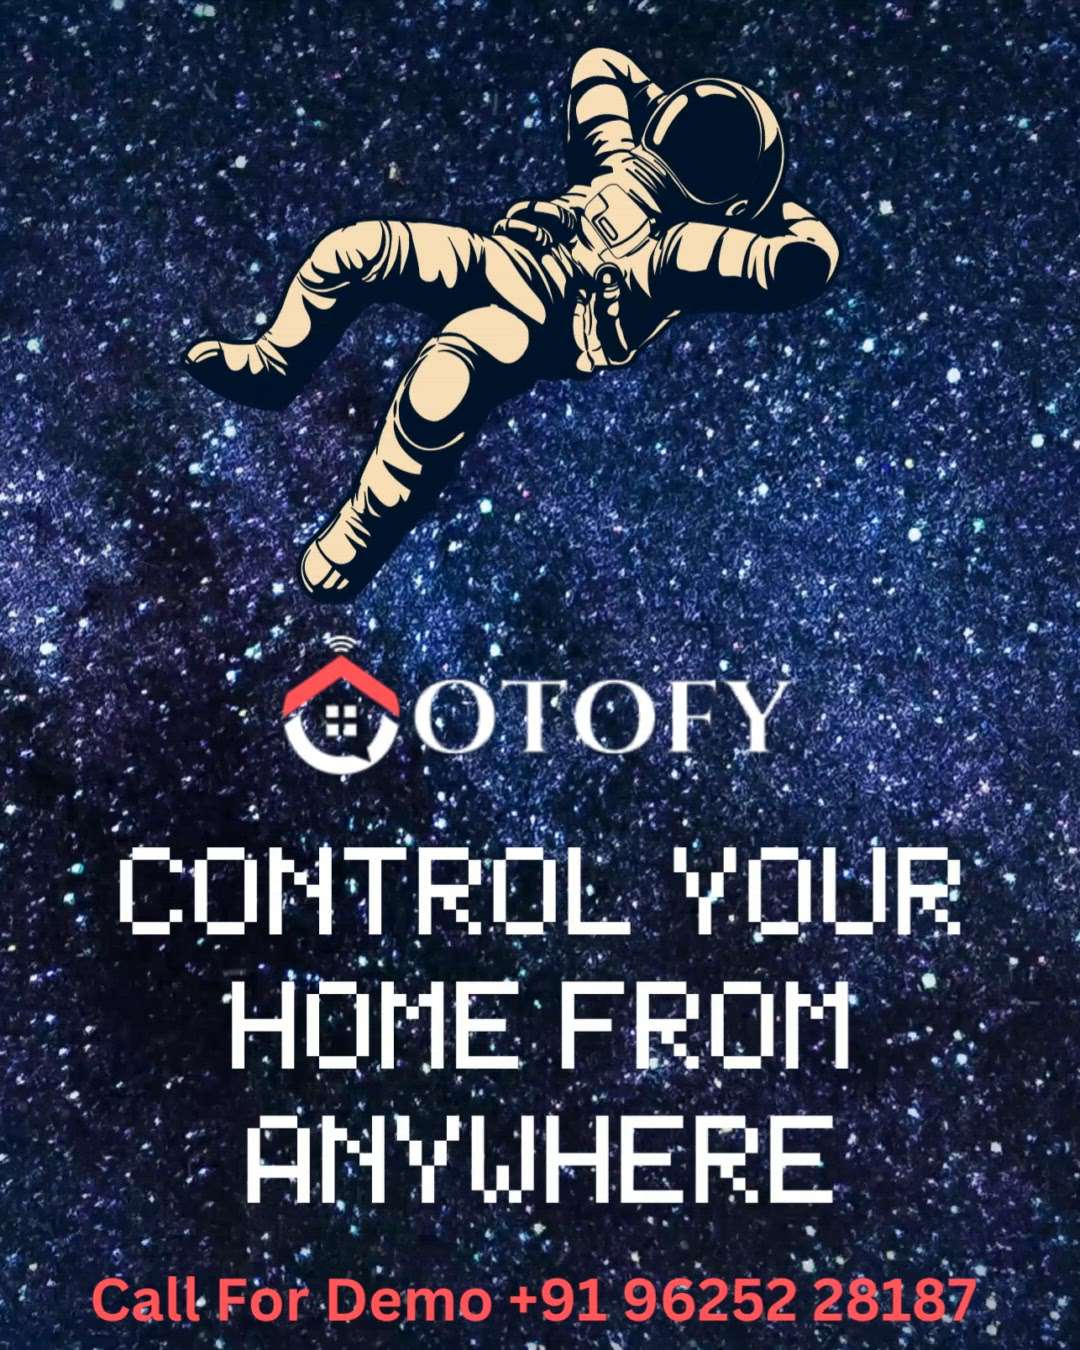 Automate your 🏠home & control all home devices from your 📱Mobile.
:
🛠️Quick Installation - No extra wiring - No modification
:
OTOFY PROUDLY MADE 796+ SMART HOMES AND NOW IT'S YOUR TURN.
:
📞Tel:+9196252 28187 & follow us : @otofy.life
:
Follow Us:-
Instgram - https://lnkd.in/g5g2F2J5
Facbook - https://lnkd.in/gV2Dy_Ut
Linkdin - https://lnkd.in/gcQimCFq

#SMARTHOMEAUTOMATION #alexahomeautomation #home #WiFi #wifiHomeAutomation #automation #control #homeautomation #okgoogle #siri #homeappliances #homecontrol #homecontrolsystems #alexa #controldevices #google #homeelectronics